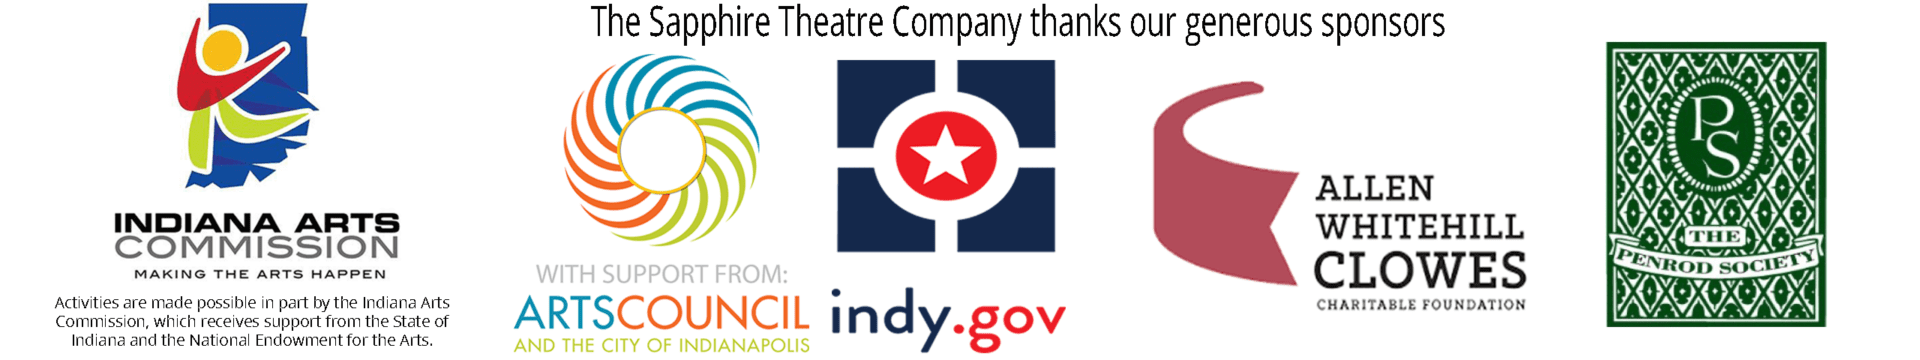 The Sapphire Theatre Company thanks our generous sponsors